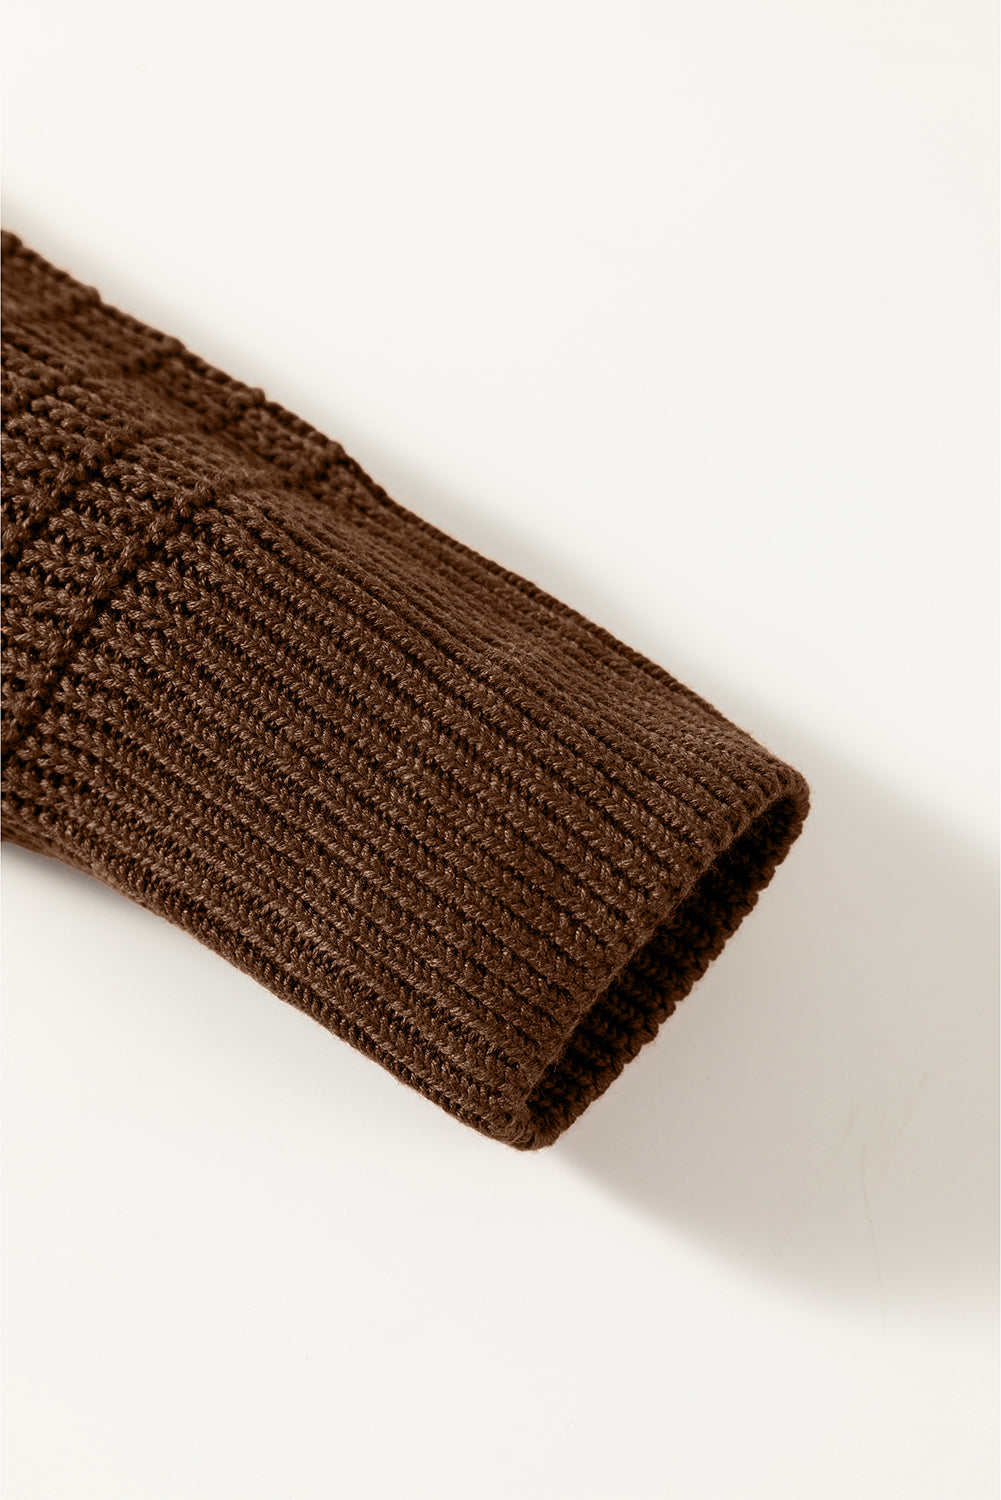 Coffee Cable Knit Mixed Textured Square Neck Sweater